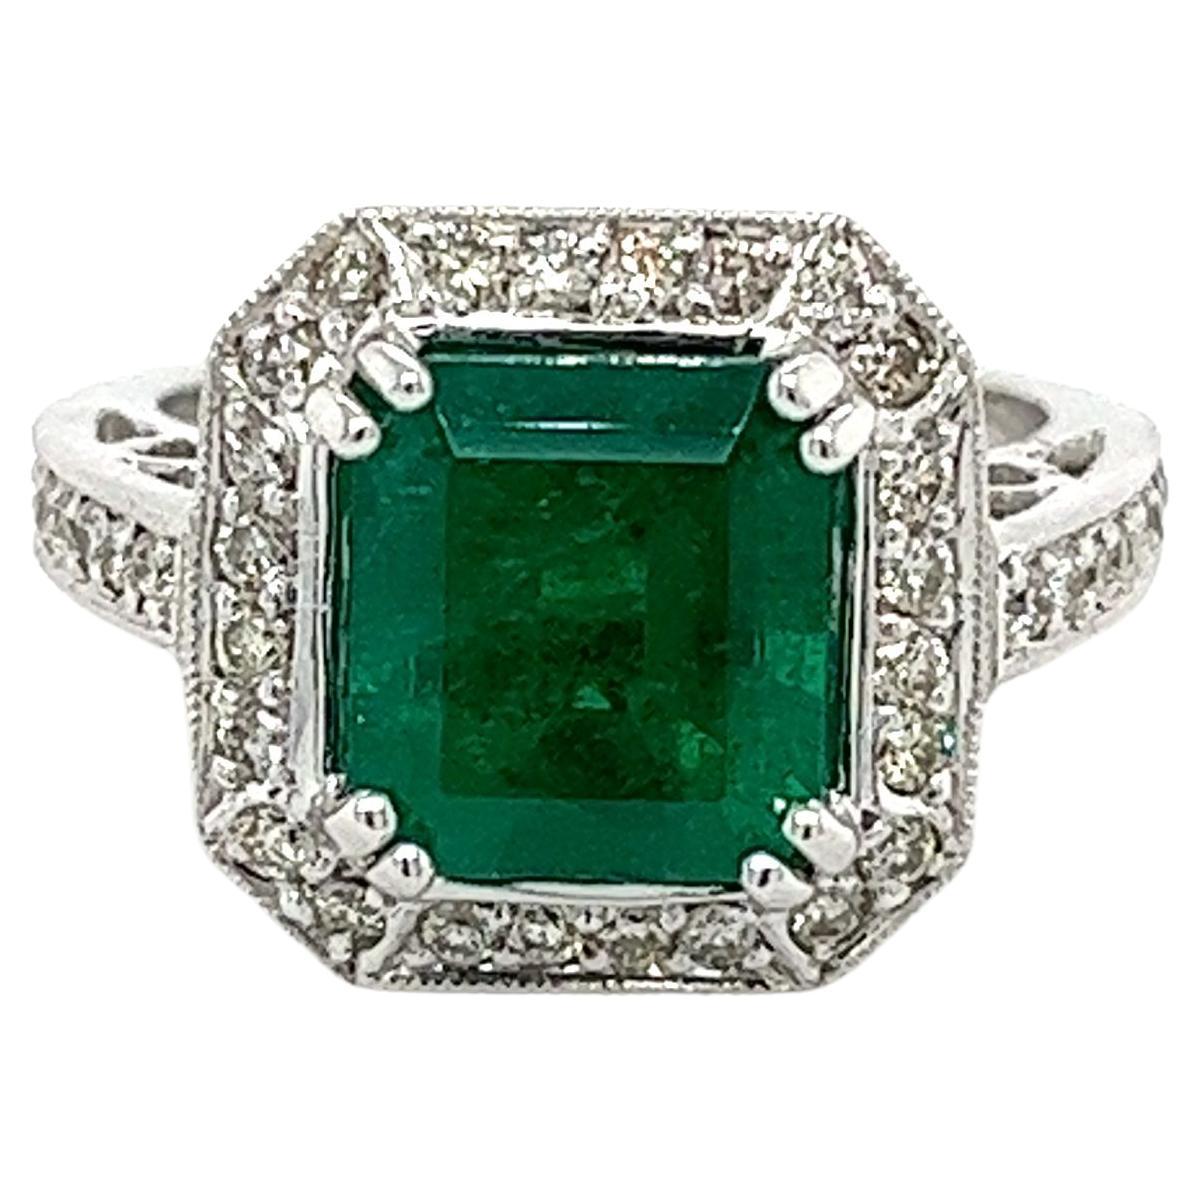 3 Carat Colombian Emerald in 18K White Gold Ring & Round Cut Diamond Halo For Sale